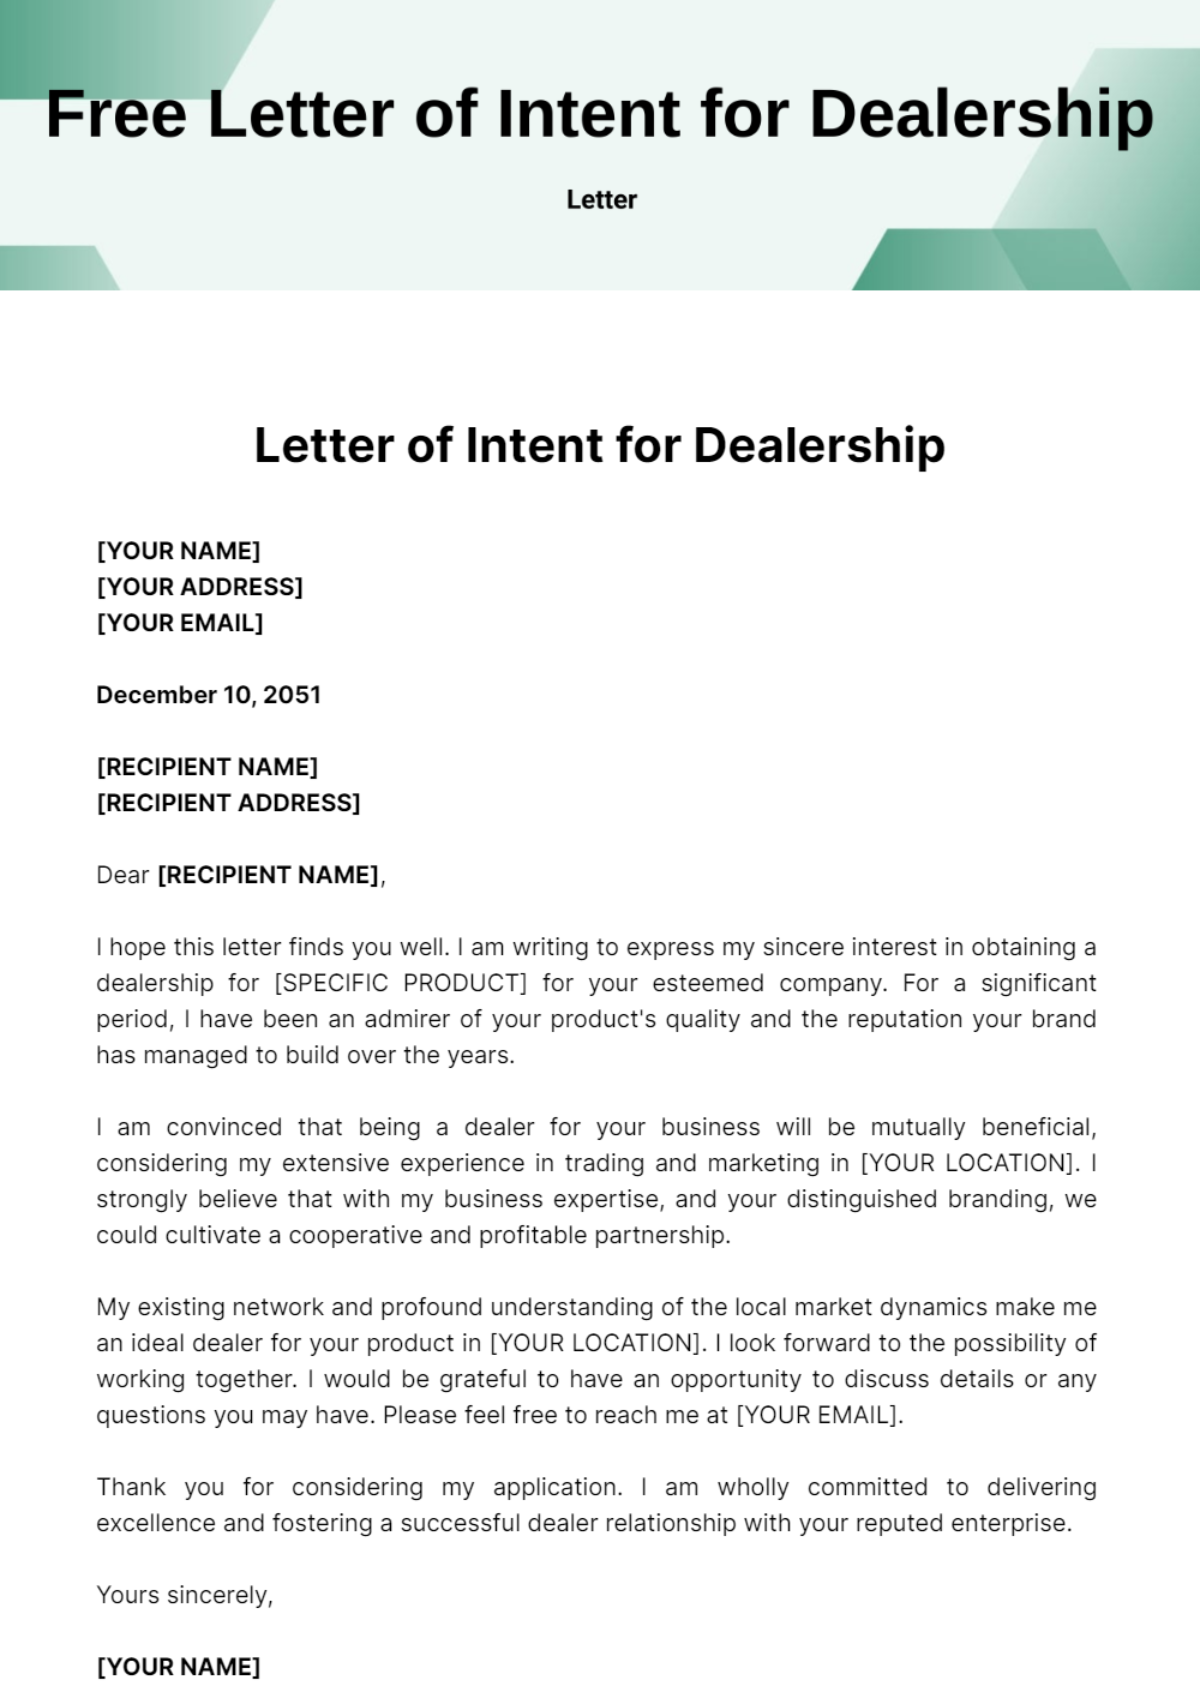 Letter of Intent for Dealership Template